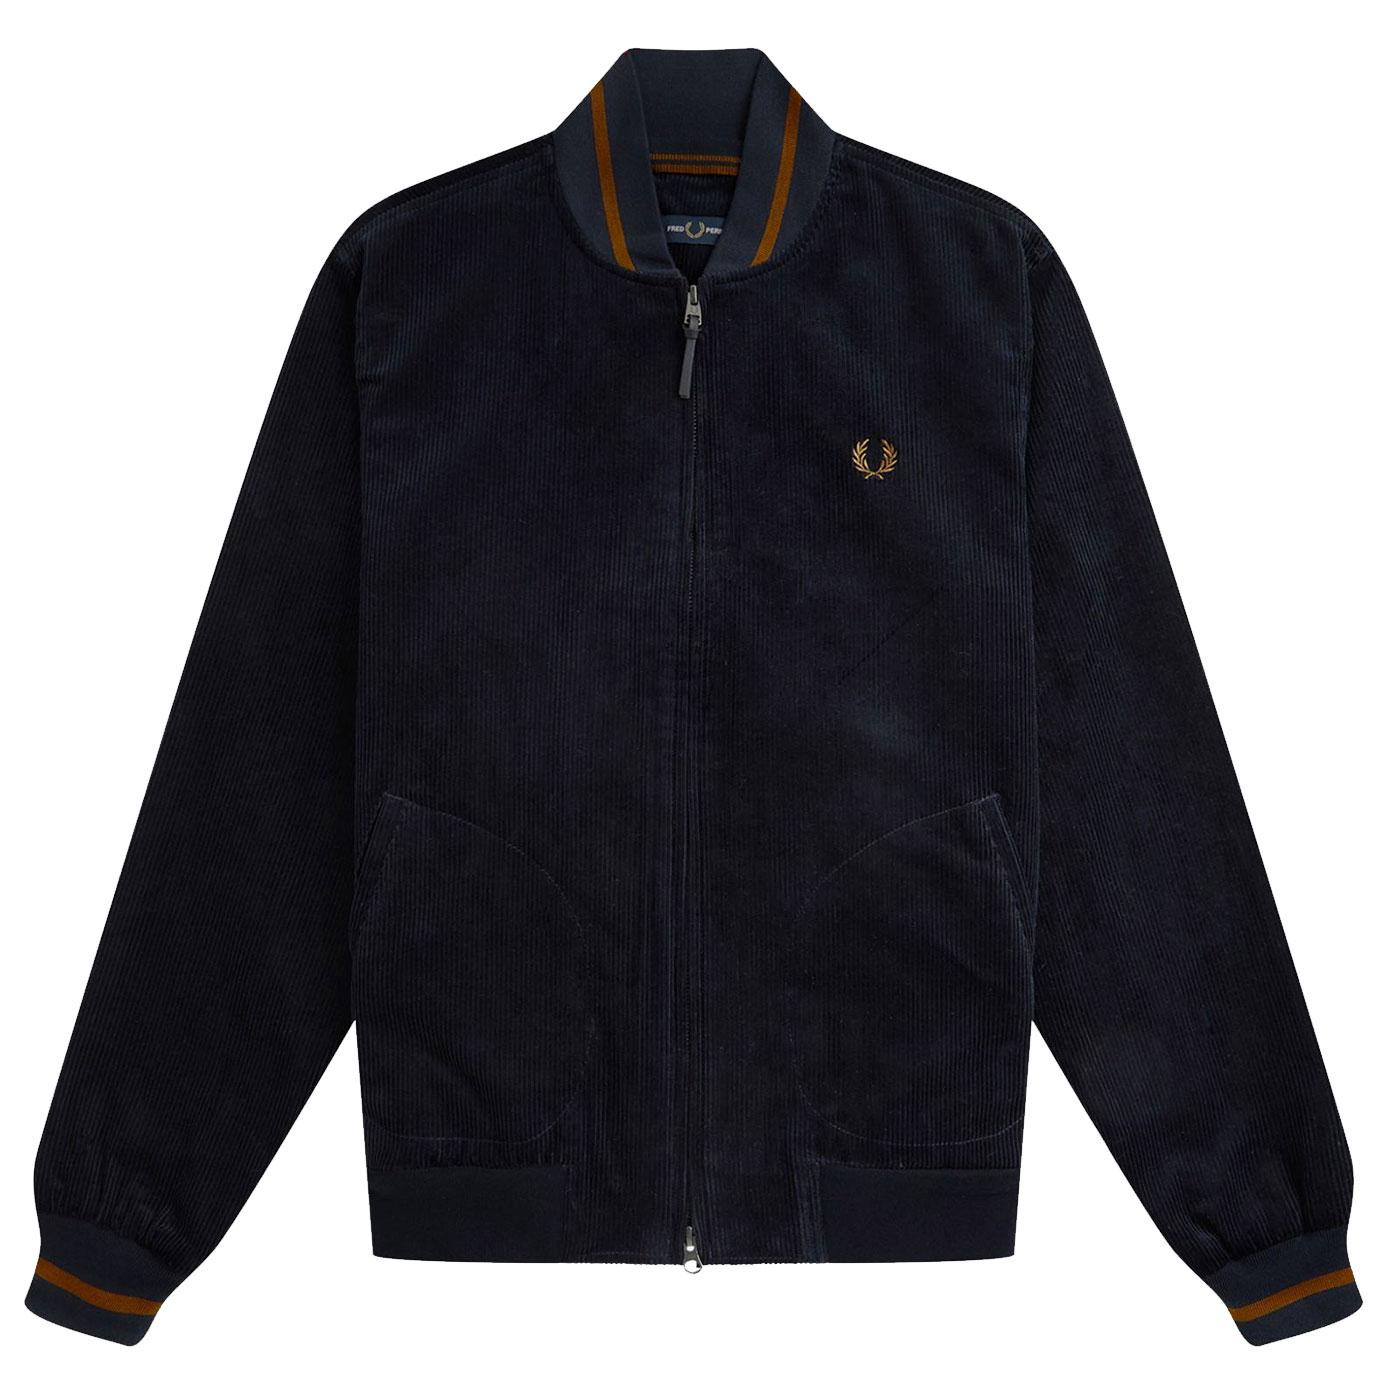 FRED PERRY Retro Mod Cord Tennis Bomber Jacket